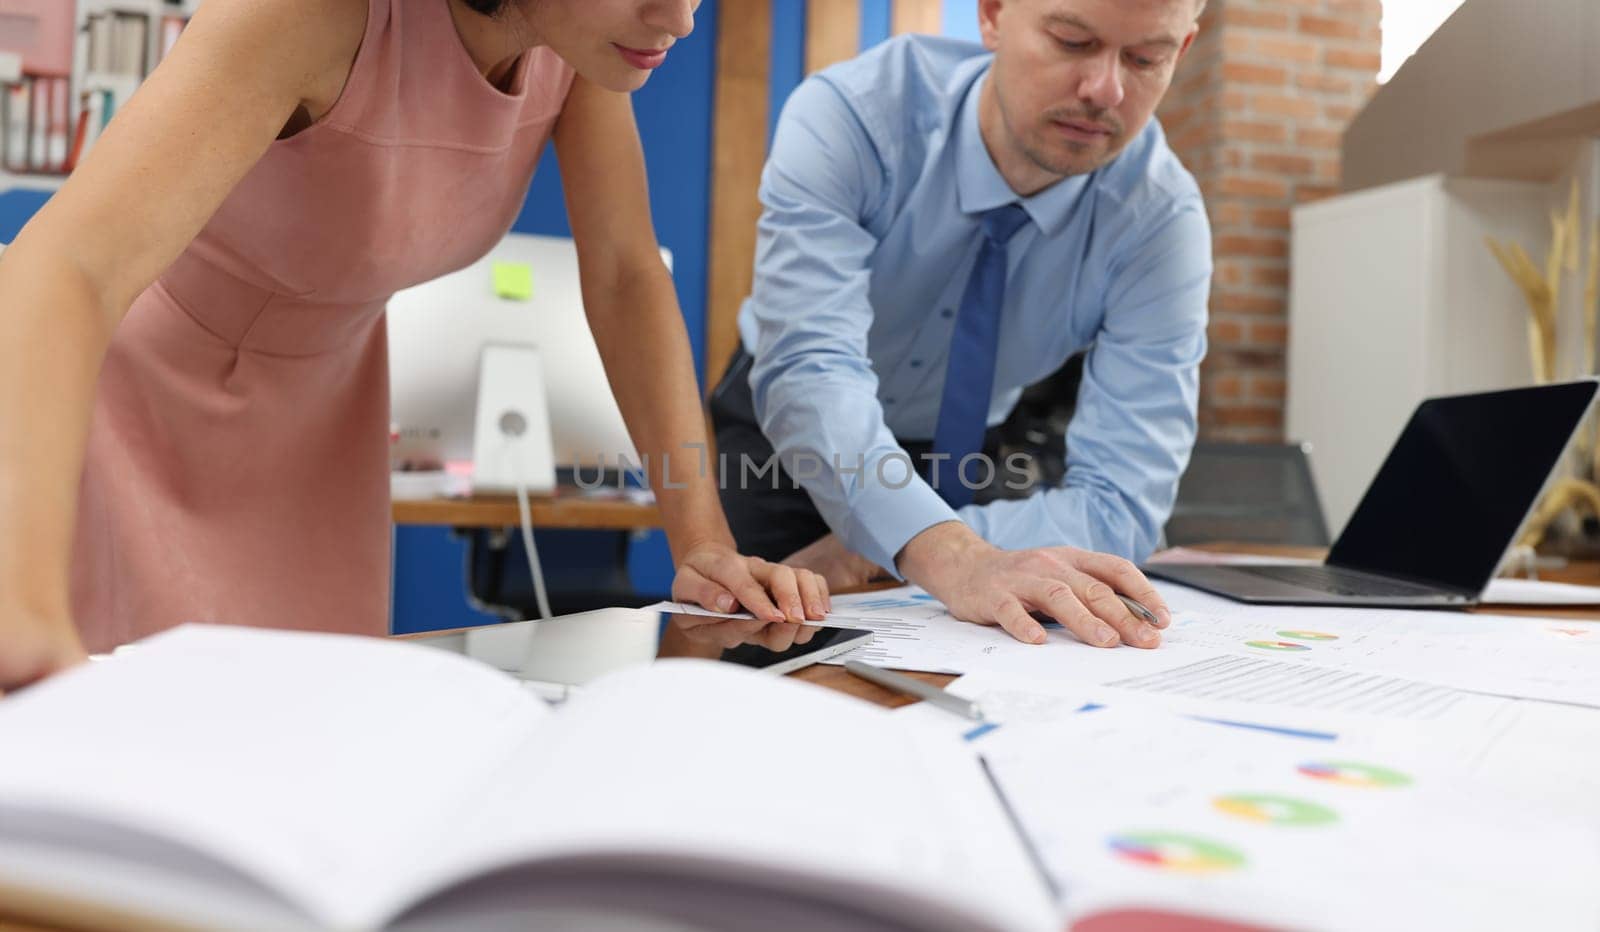 Business man and woman studying documents at table in office closeup. Business strategy concept